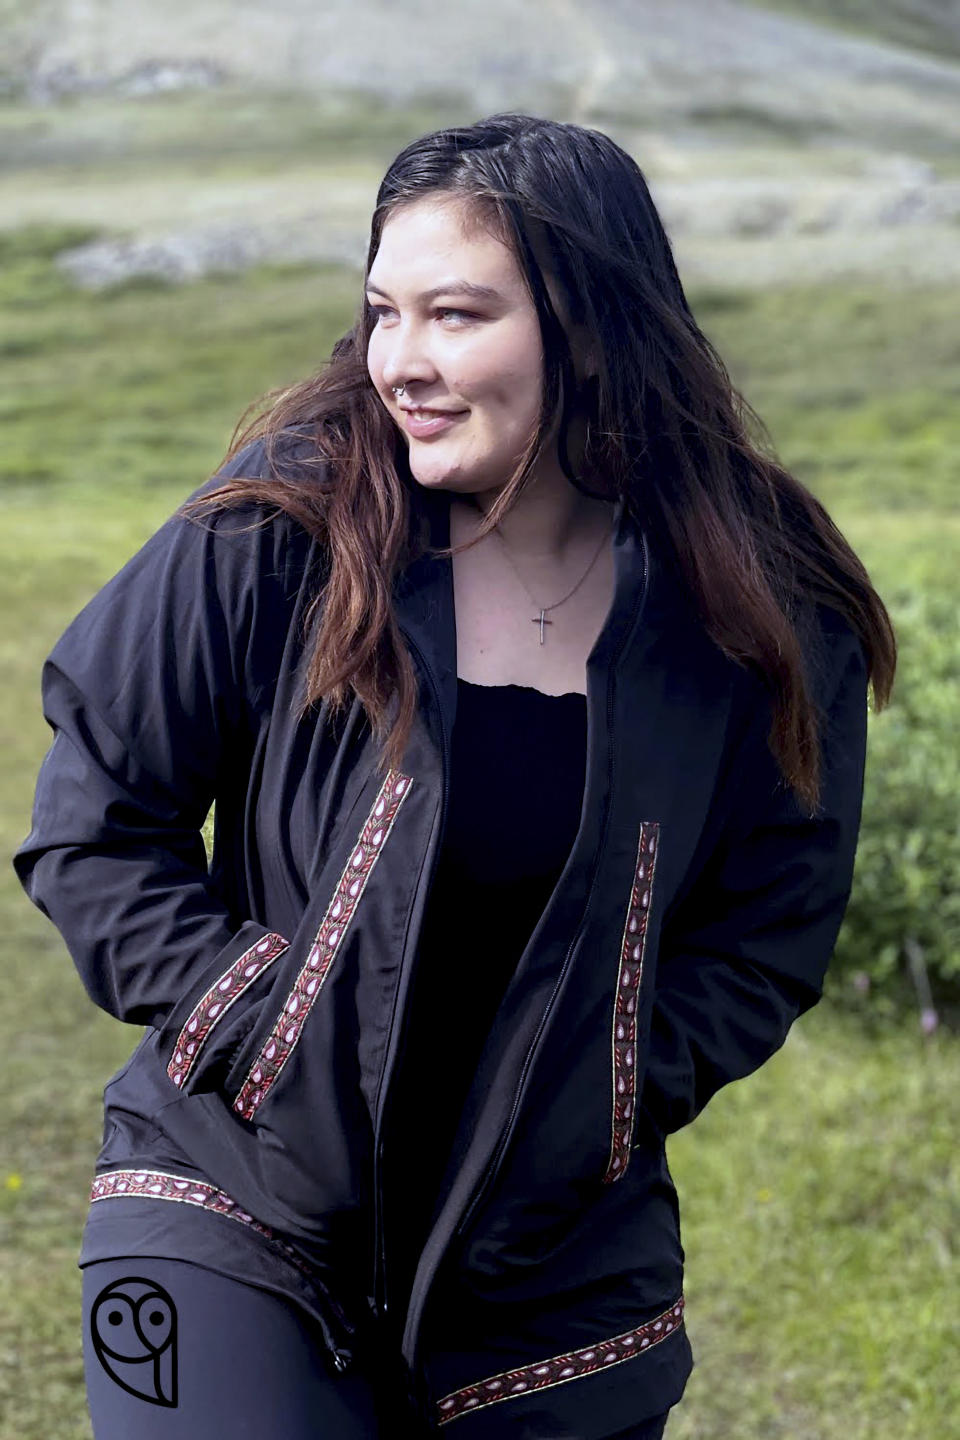 This undated photo shows Sara Bioff wearing an Atmik, a water-proof garment made by her mother, Alice Bioff, that resembles the traditional Alaska Native garment called a kuspuk in Nome, Alaska. The garment was inspired by a tourist Alice Bioff met in 2016 when she was a tour guide, and she hopes the $600 million expansion of the Port of Nome will translate into support of Nome stores and Indigenous artists. (Alice Bioff via AP)